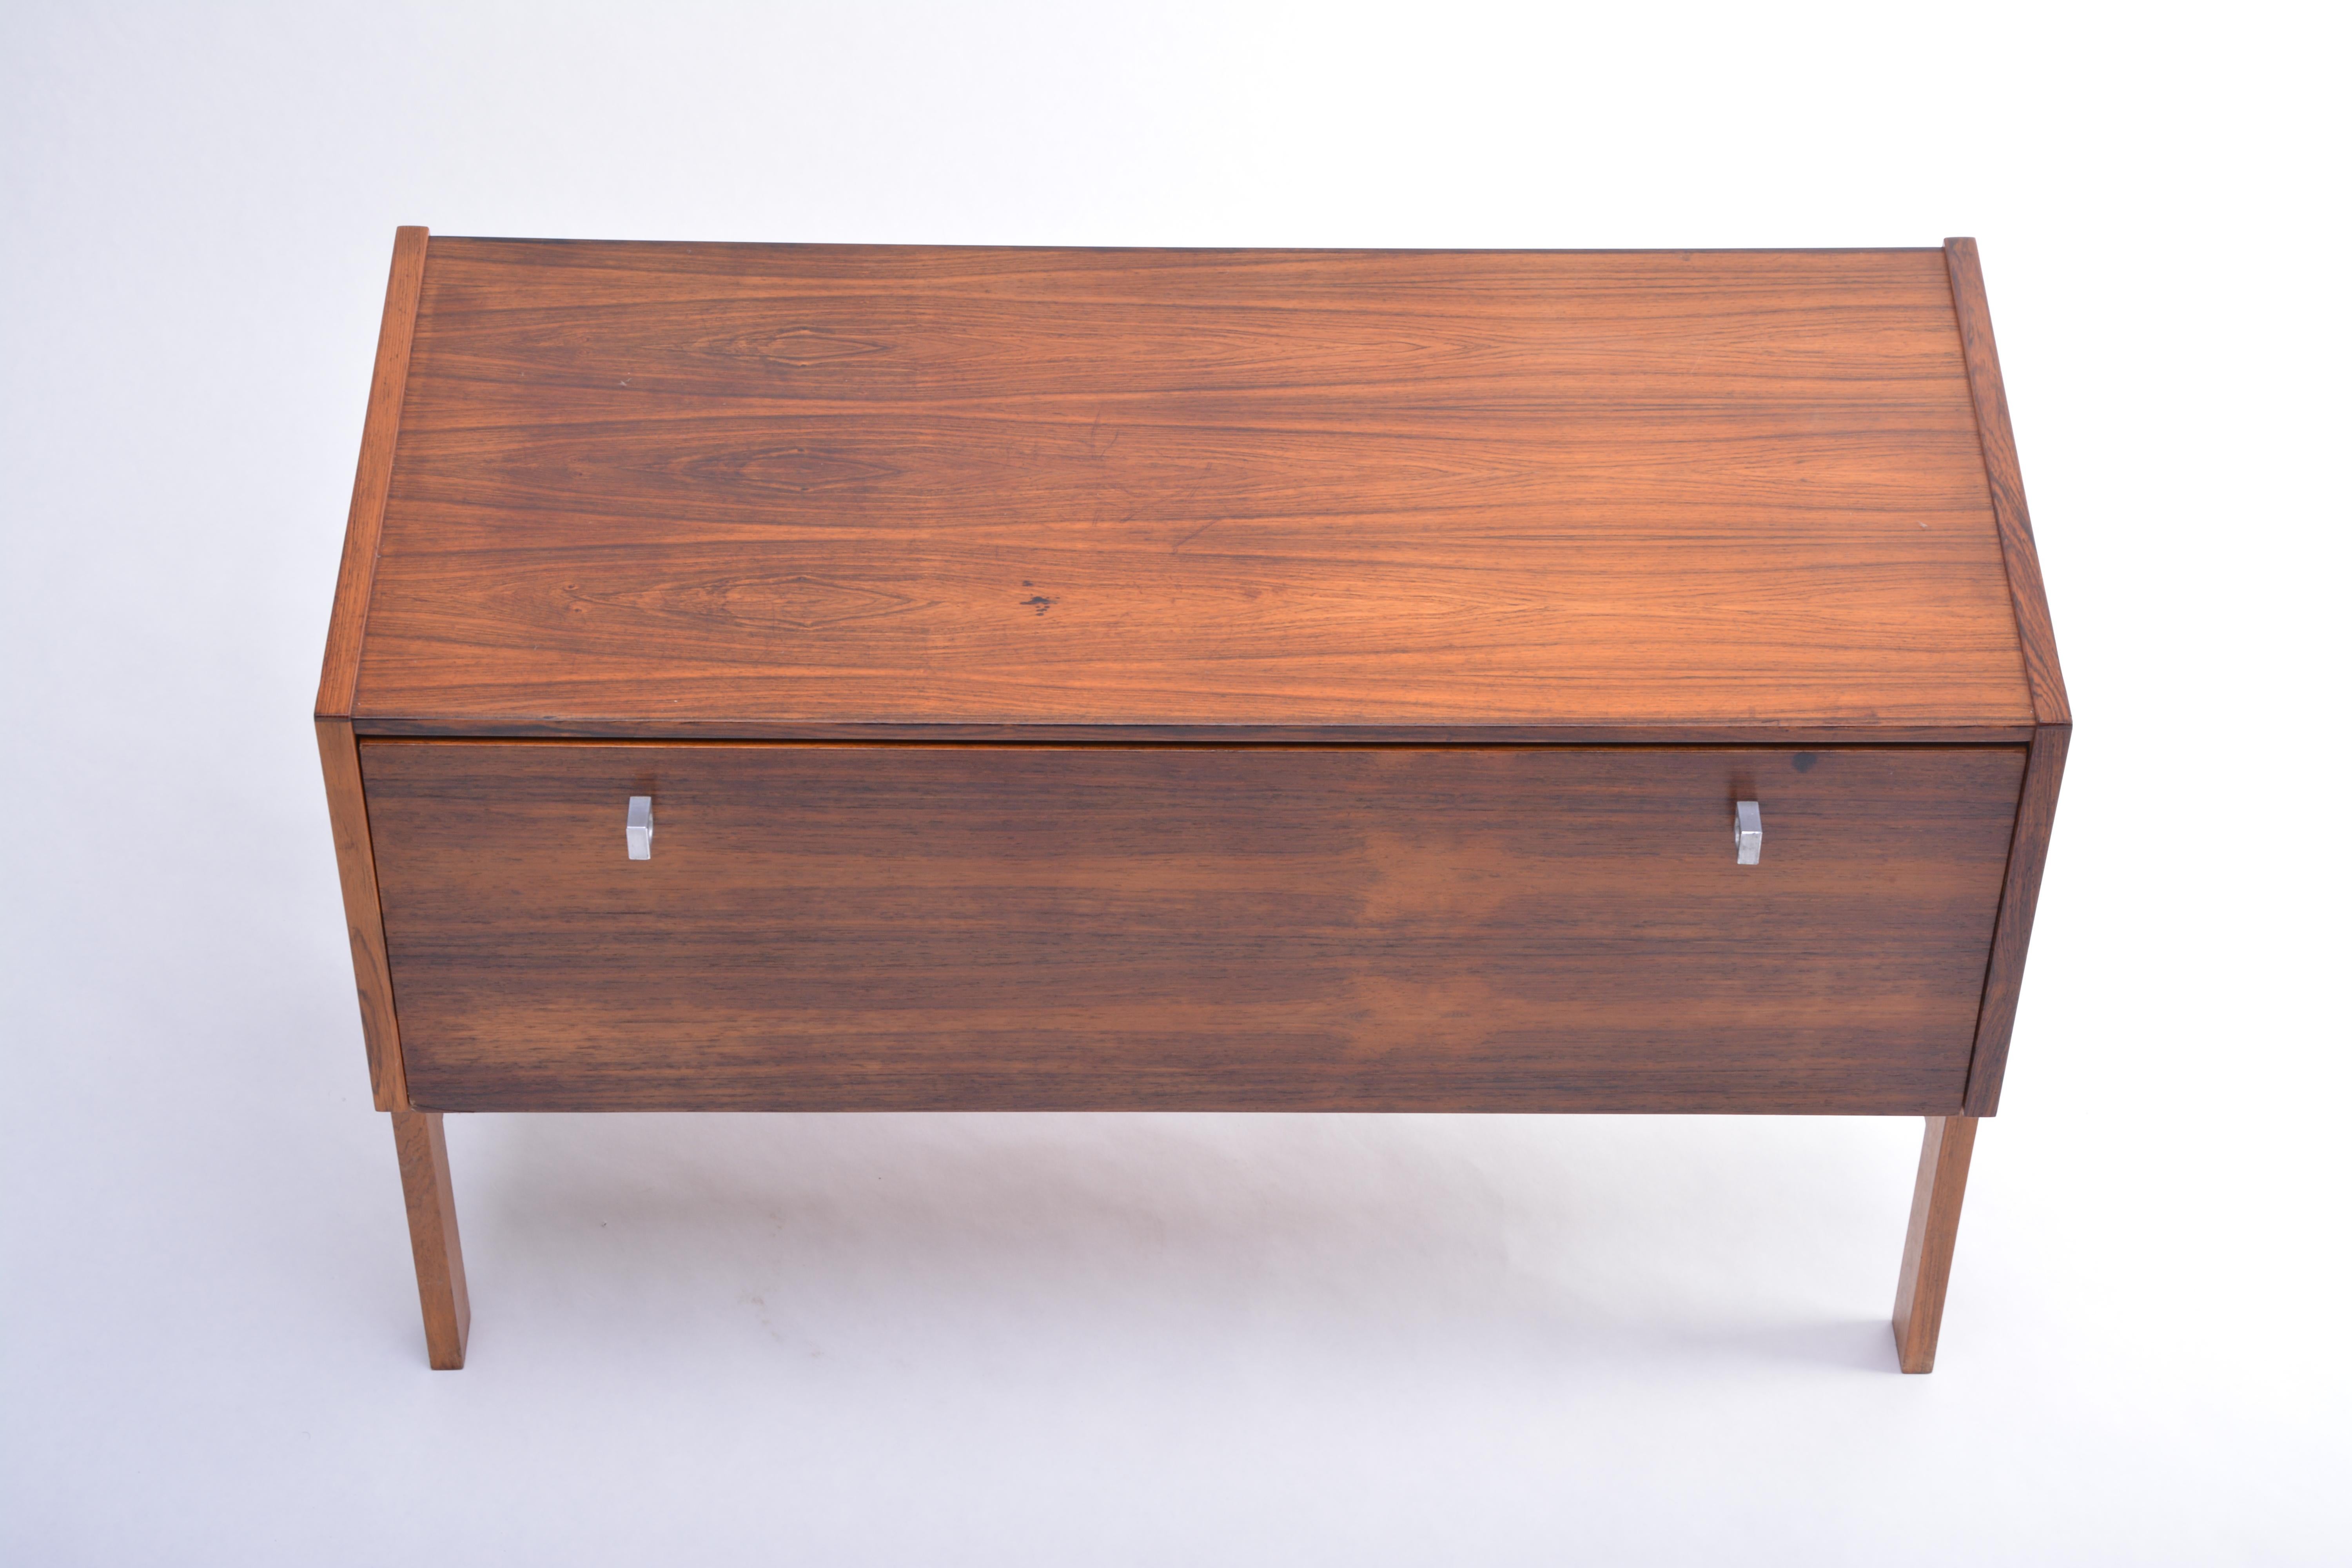 Danish Mid-Century Modern music cabinet by Aksel Kjersgaard for Odder

This cabinet was designed by Aksel Kjersgaard. It was originally created to store music equipment. It was produced by Odder in Denmark in the 1960s. The cabinet has a front door